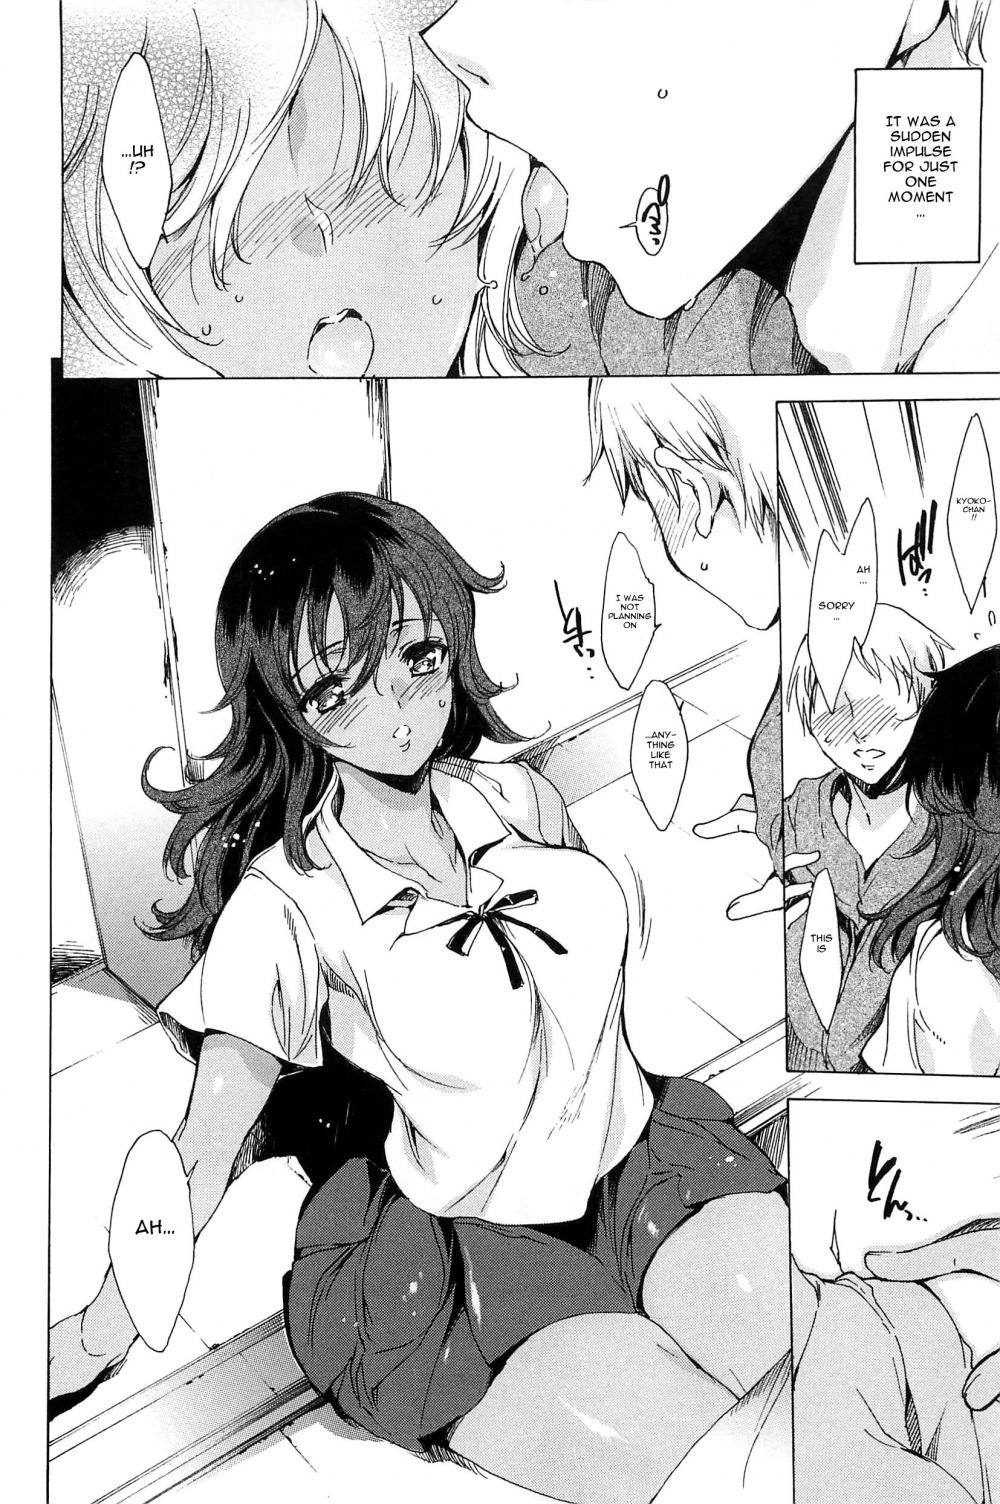 Chain Anime Hentai - Chains of Lust - NTR Girlfriend-Chapter 10-Hentai Manga Hentai Comic -  Page: 10 - Online porn video at mobile